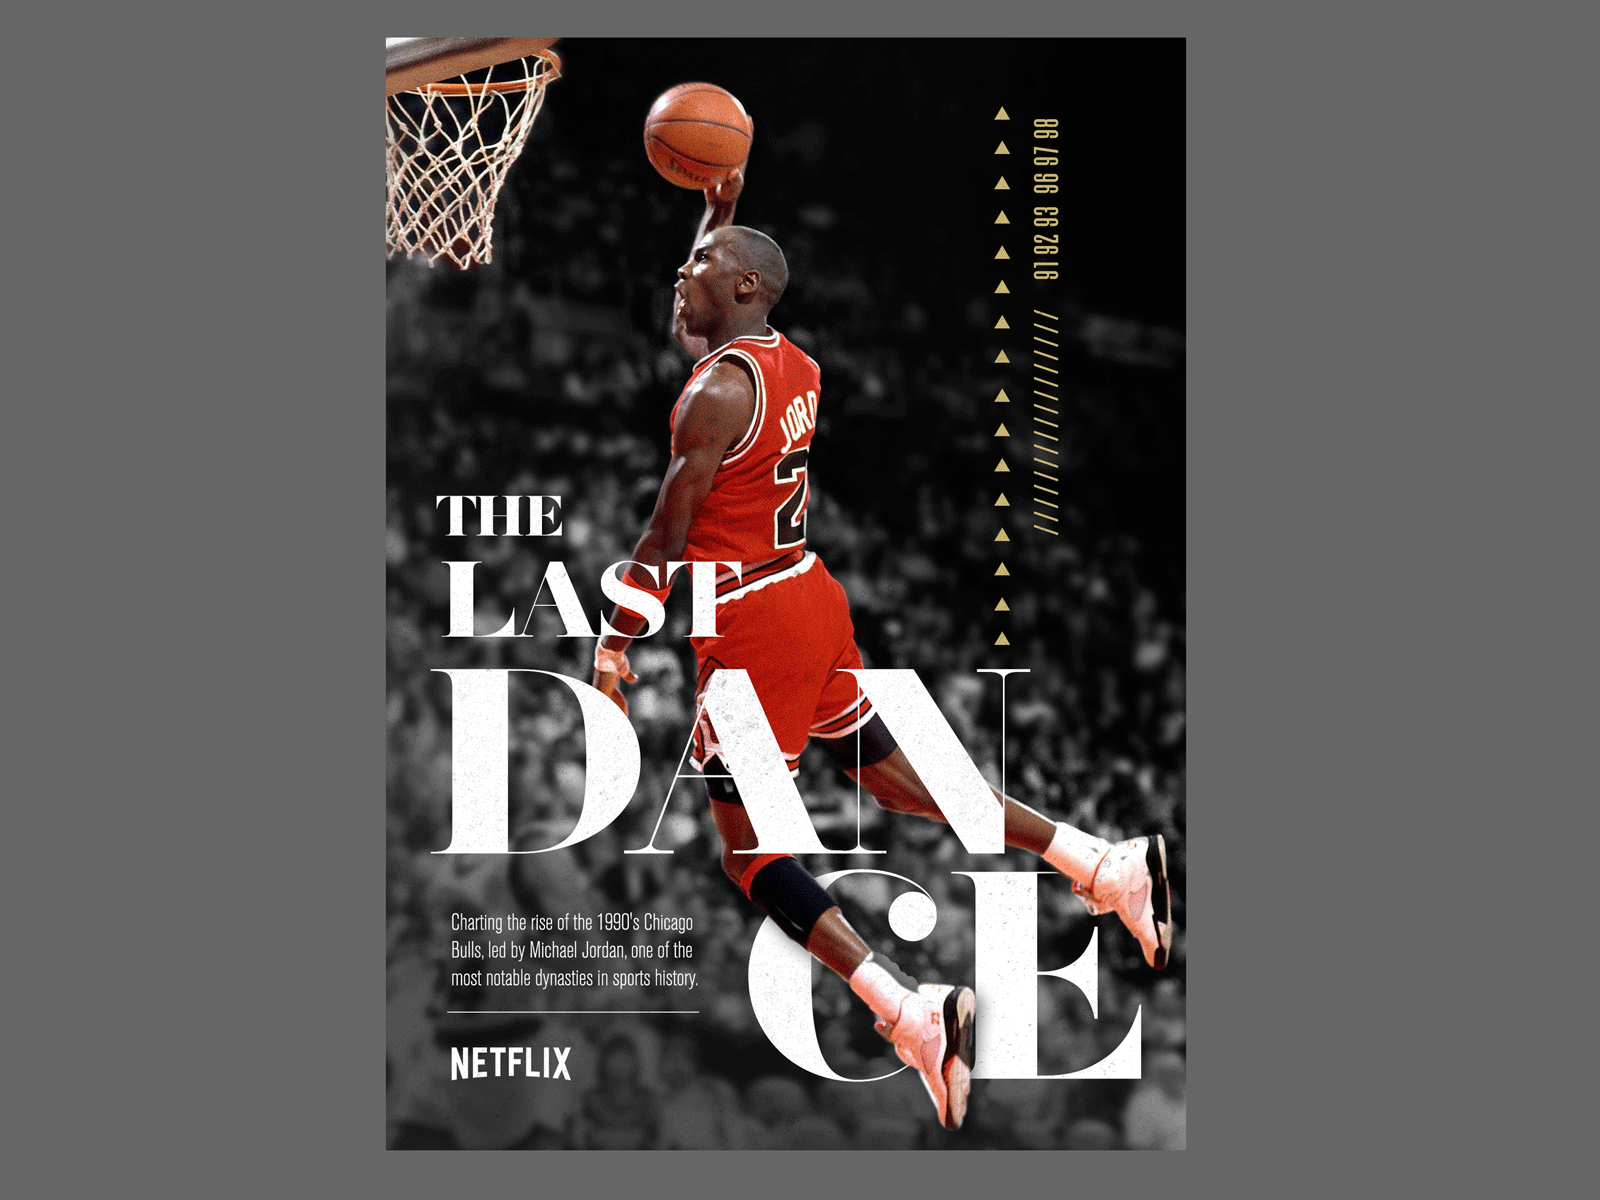 The Last Dance Poster  My tribute to MJ by Damian Lubenfeld on